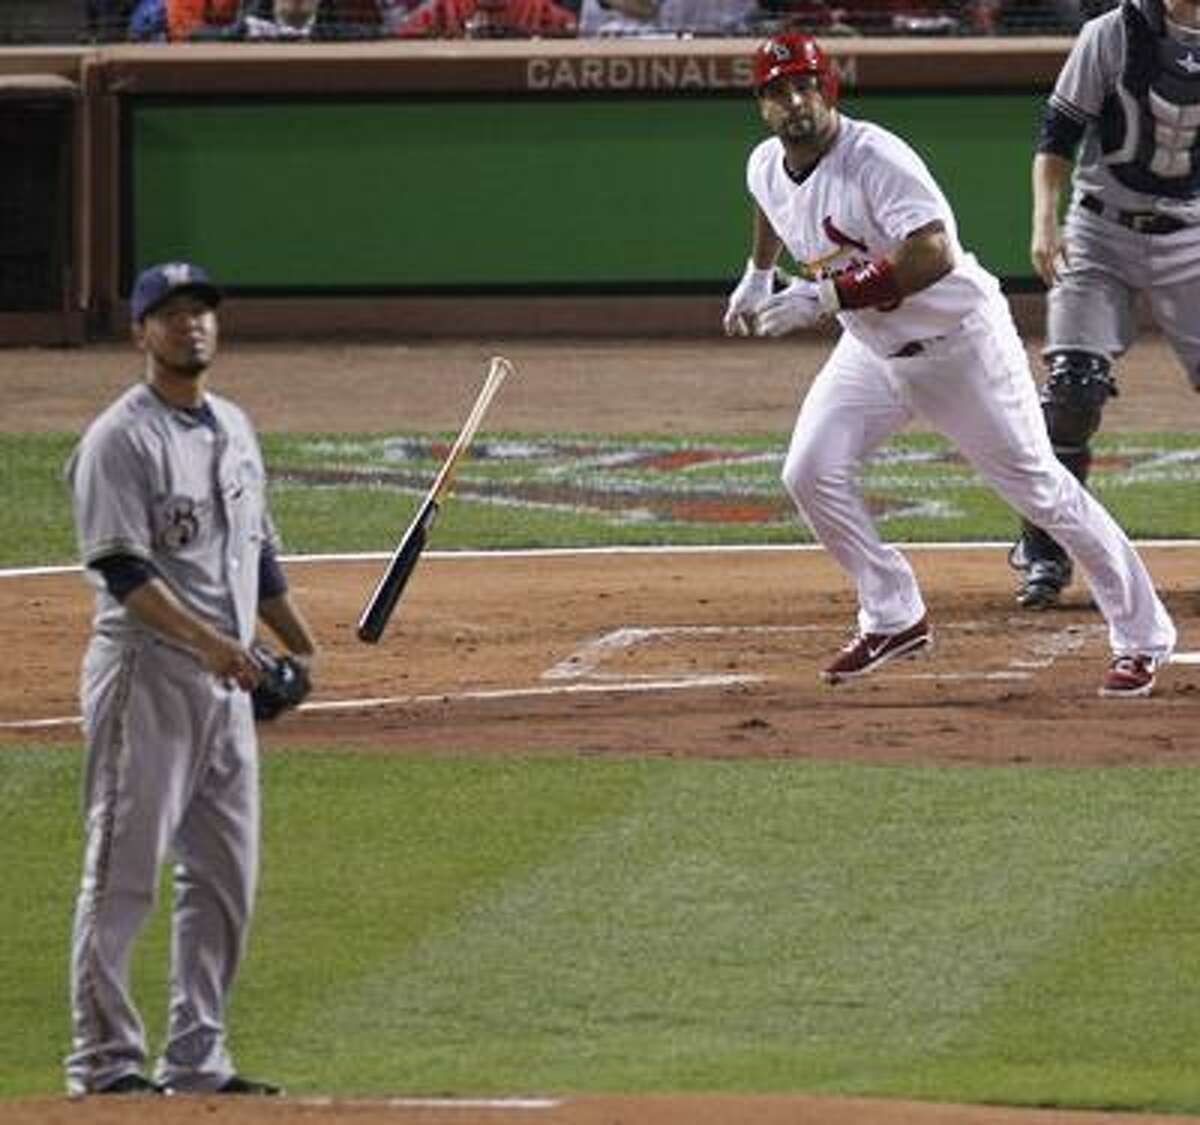 Milwaukee Brewers starting pitcher Yovani Gallardo and St. Louis Cardinals' Albert Pujols watch Pujols' RBI double during the first inning of Game 3 of baseball's National League championship series Wednesday, Oct. 12, 2011, in St. Louis. (AP Photo/Jeff Roberson)